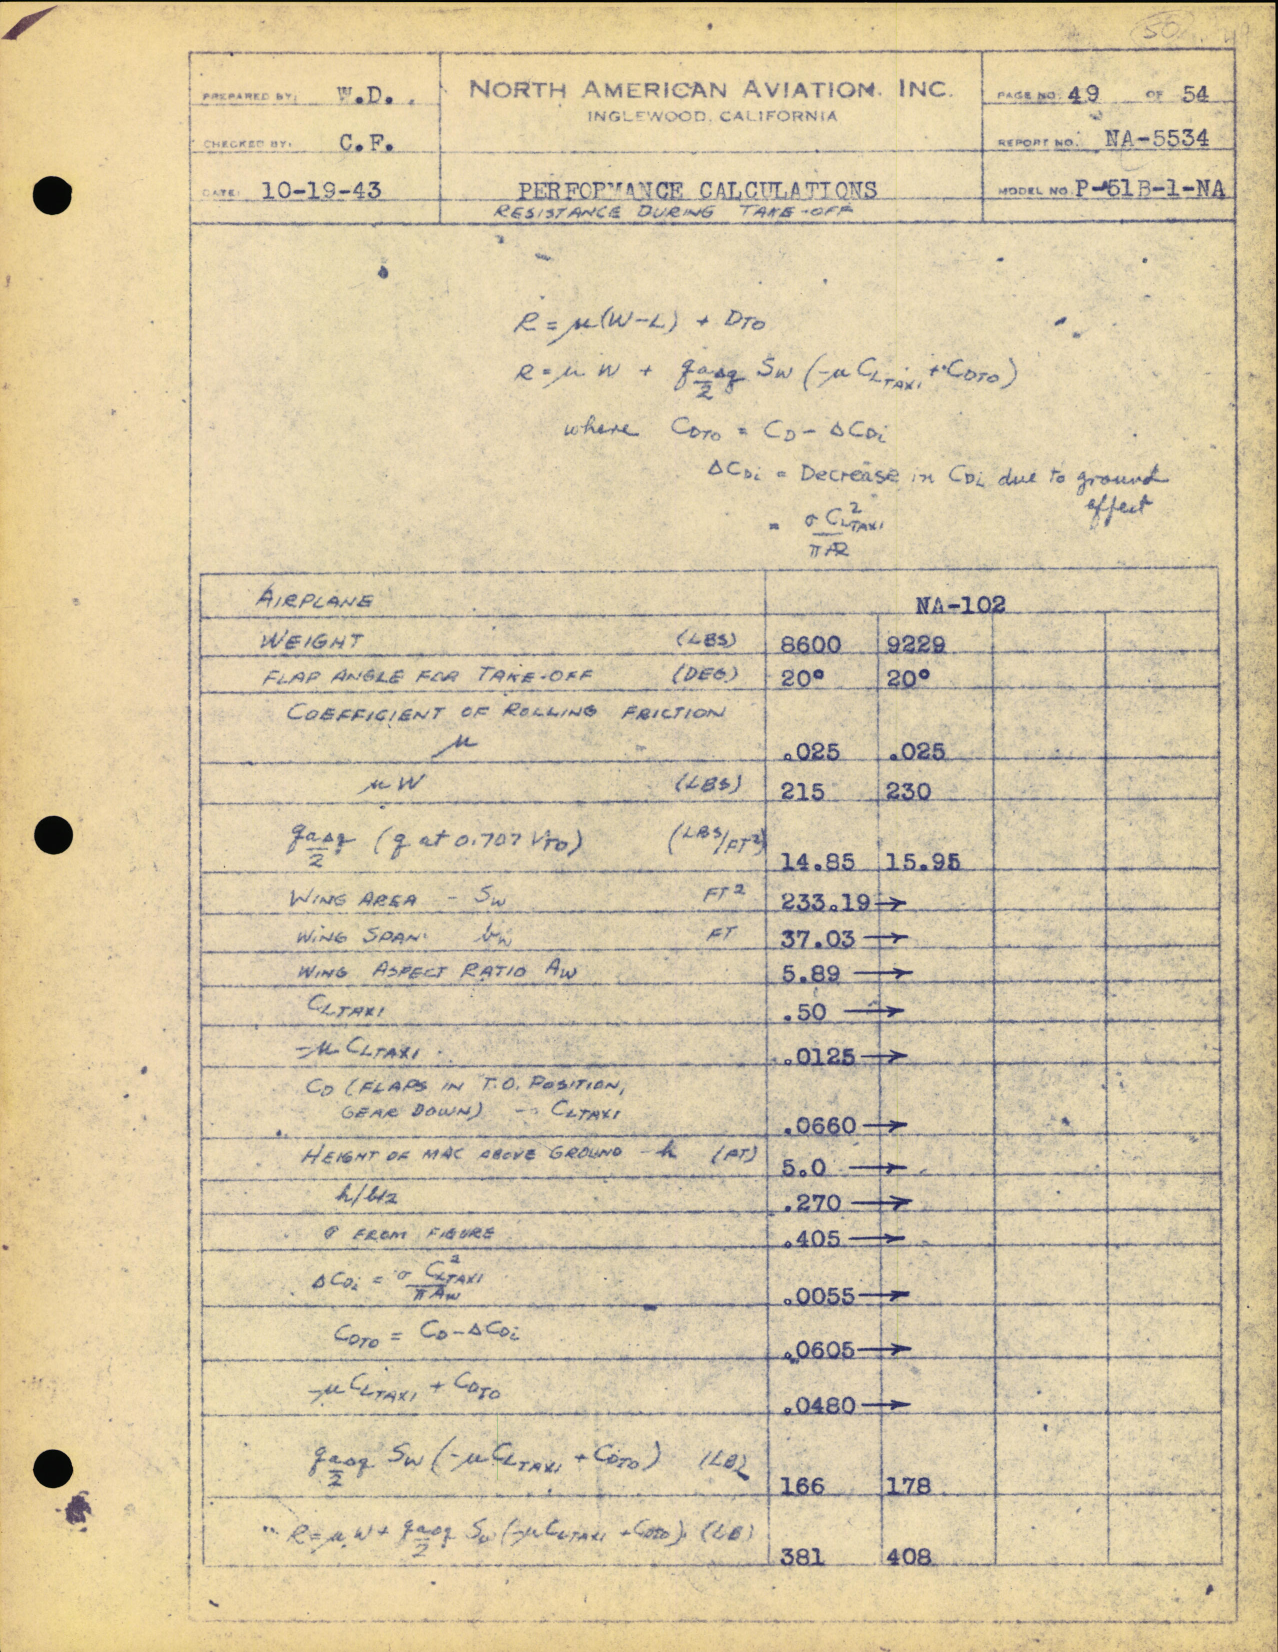 Sample page 55 from AirCorps Library document: Performance Calculations for P-51B-1-NA (North American Engineering Dept)